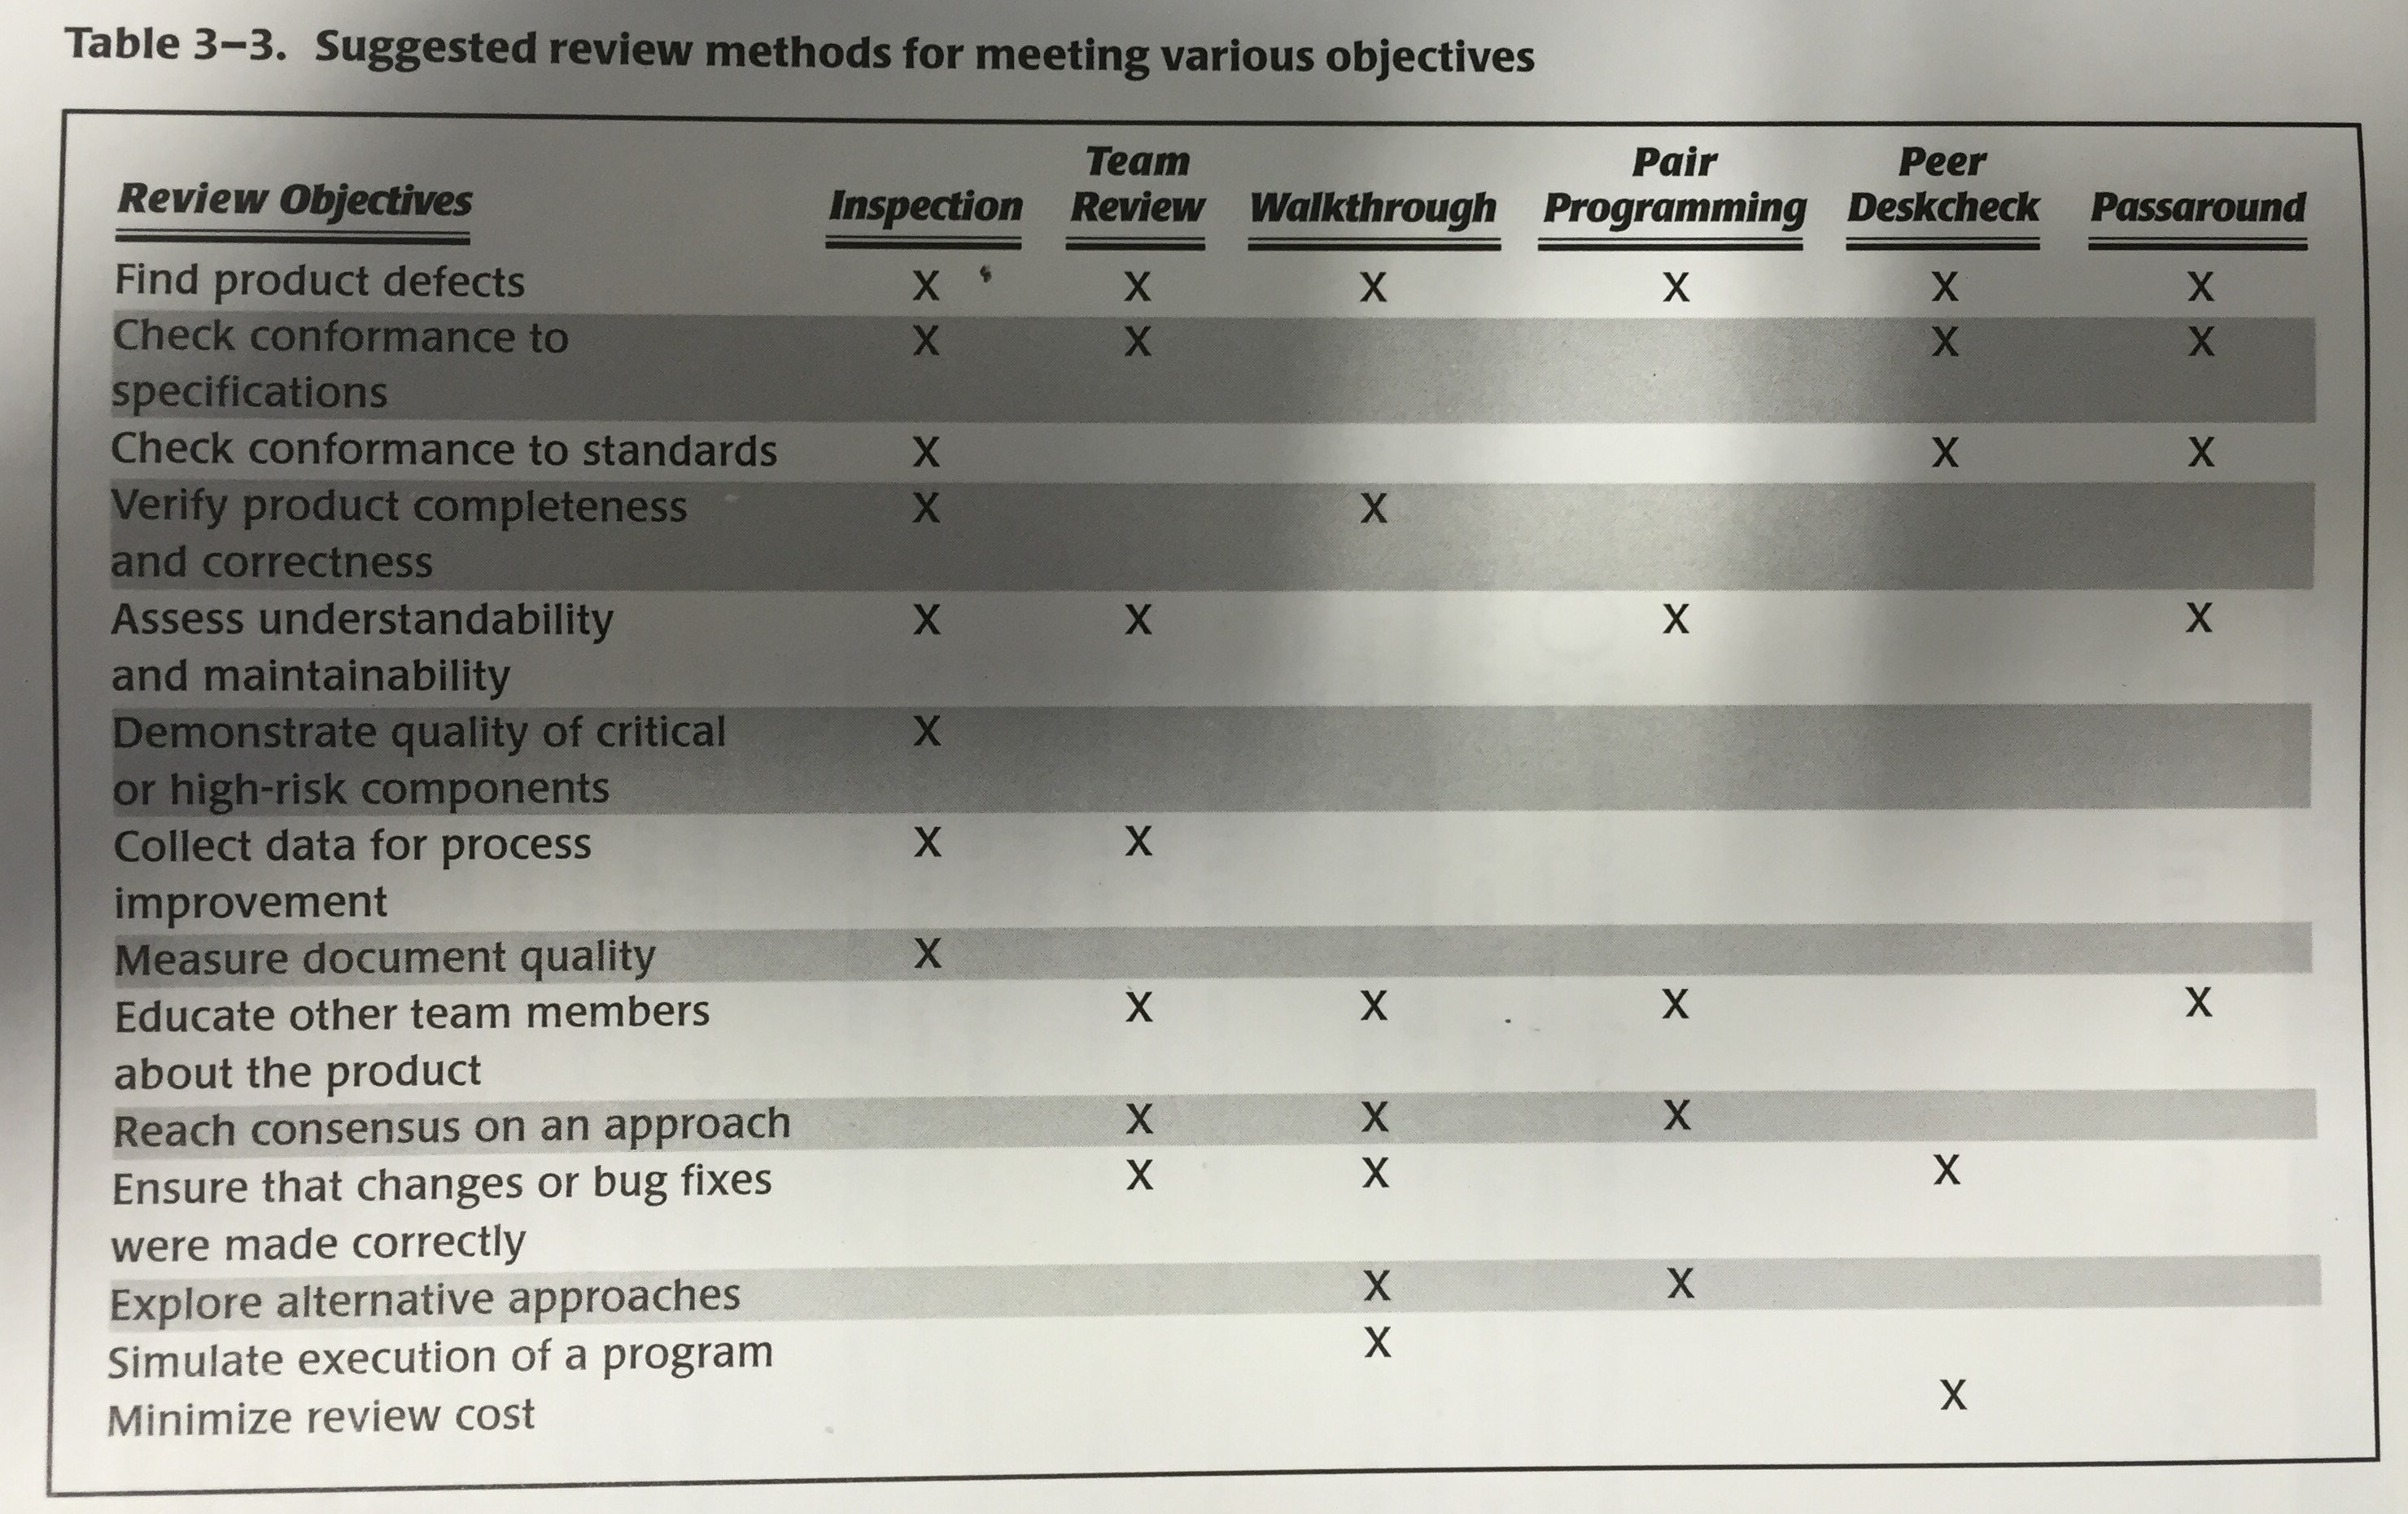 Suggested review methods from "Peer Reviews in Software"